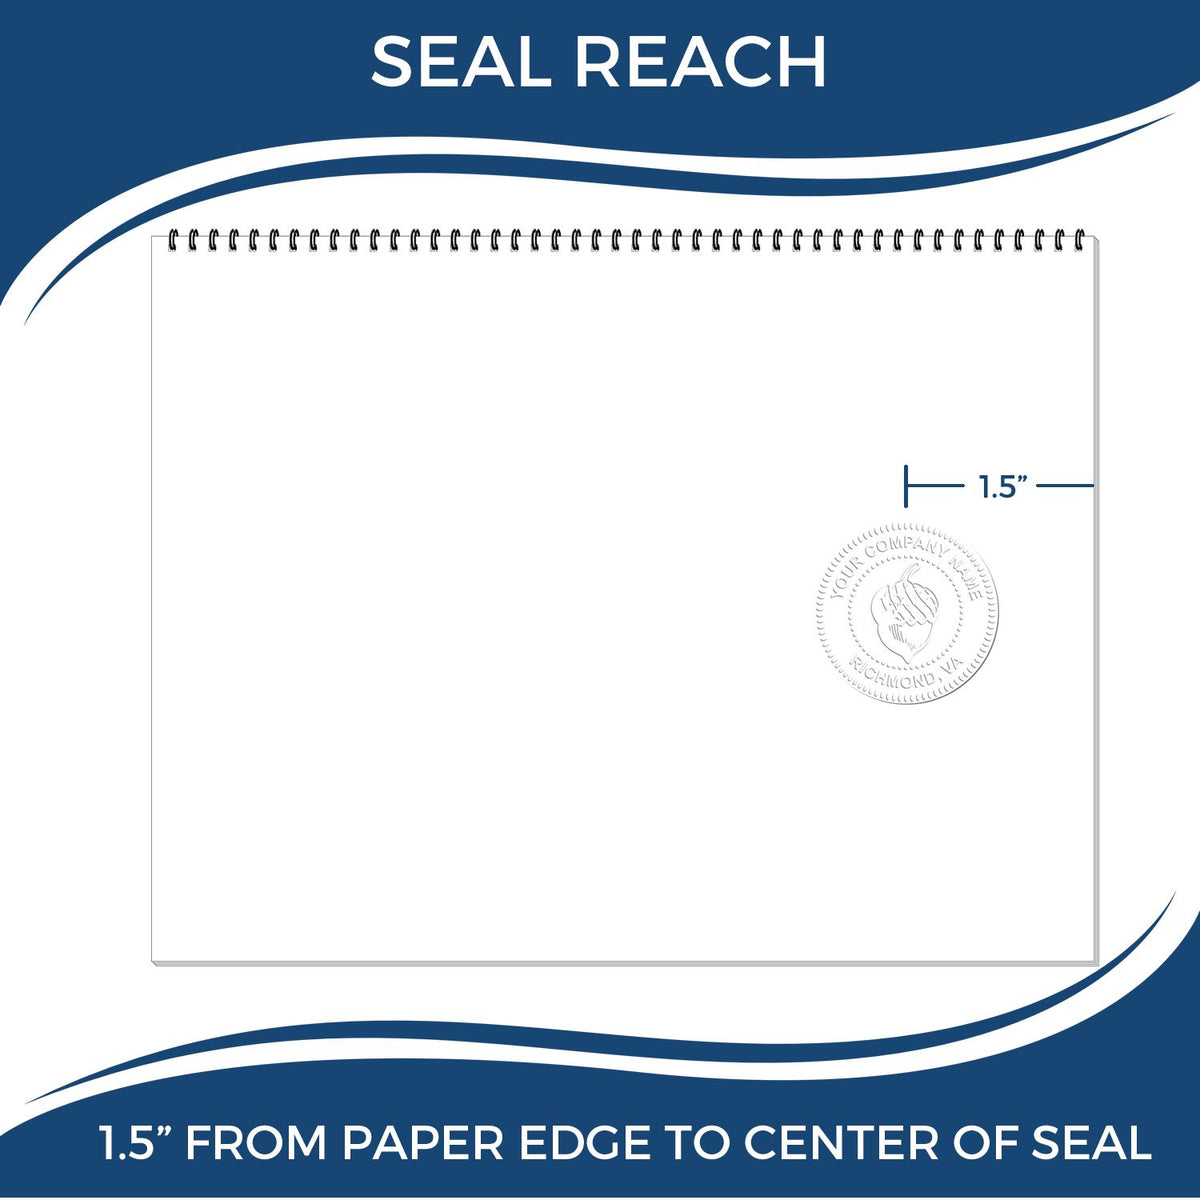 An infographic showing the seal reach which is represented by a ruler and a miniature seal image of the Gift Maine Architect Seal